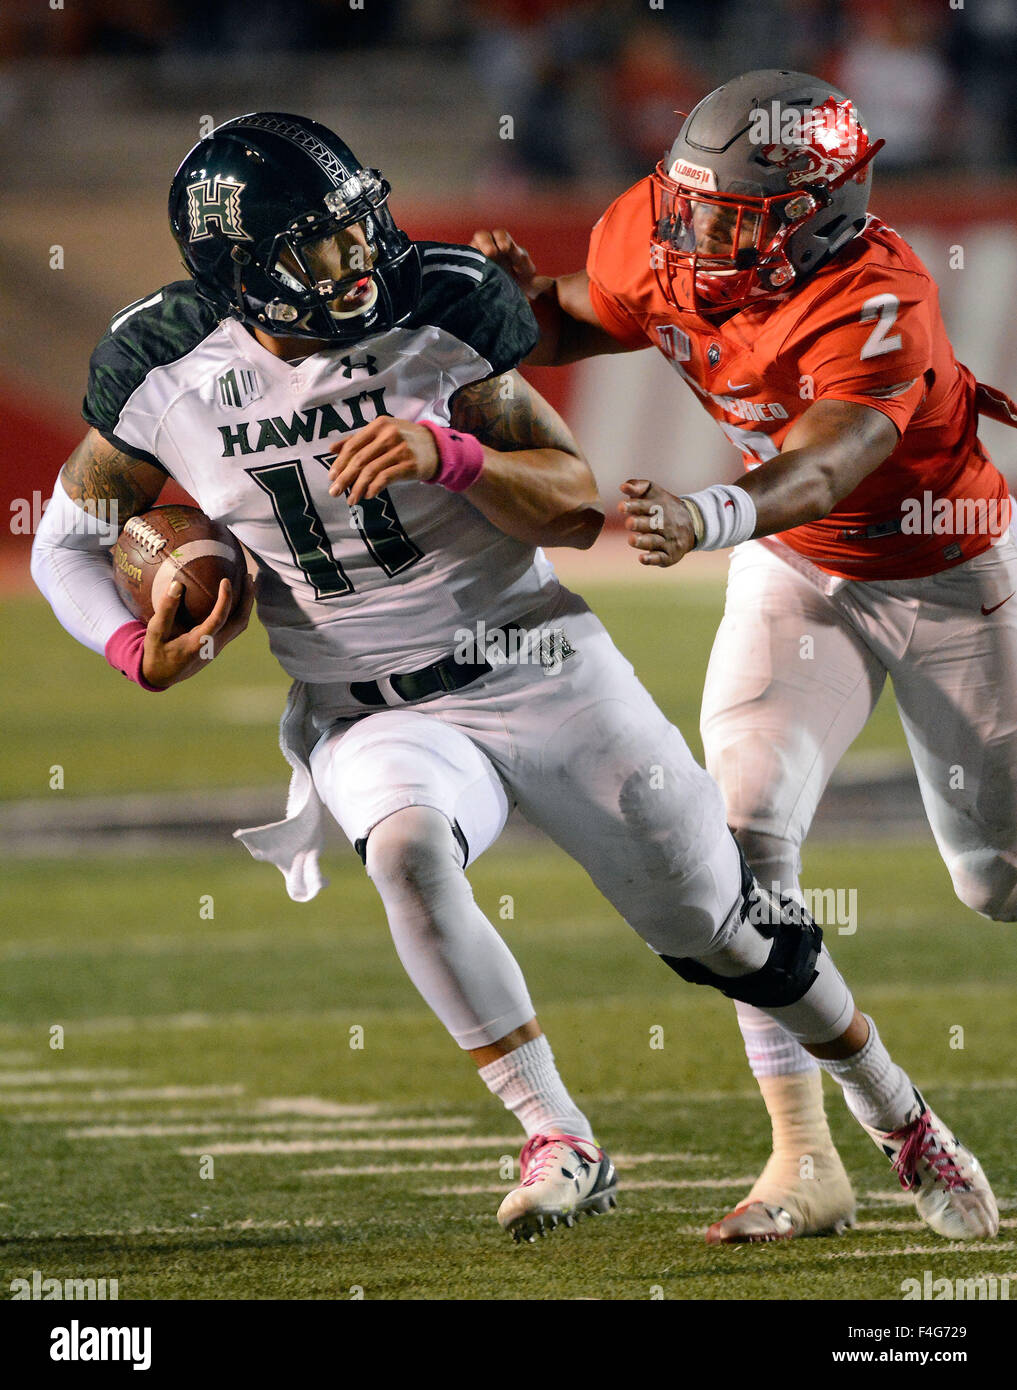 Albuquerque, NM, USA. 17th Oct, 2015. UNM's #2 Kimmie Carson runs down Hawaii's quarterback #11 Ikaika Woolsey in the second half of their game. Saturday, Oct. 17, 2015. © Jim Thompson/Albuquerque Journal/ZUMA Wire/Alamy Live News Stock Photo